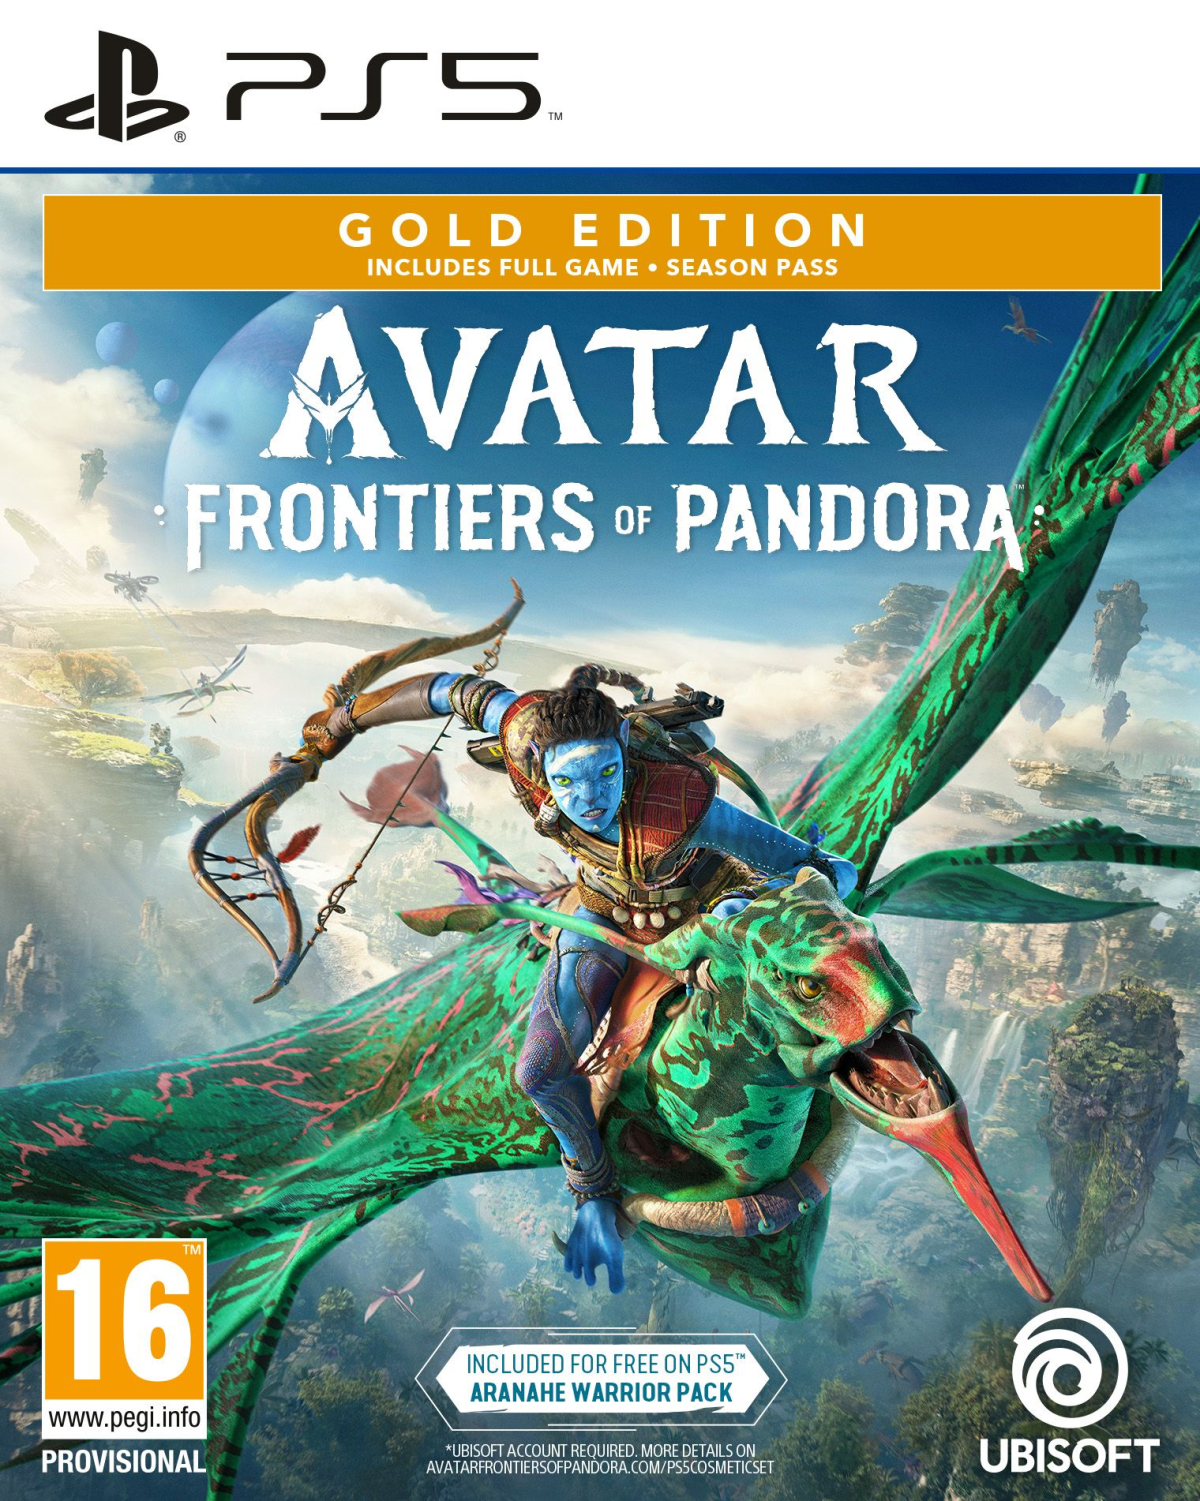 PS5 Avatar Frontiers of Pandora Gold Edition